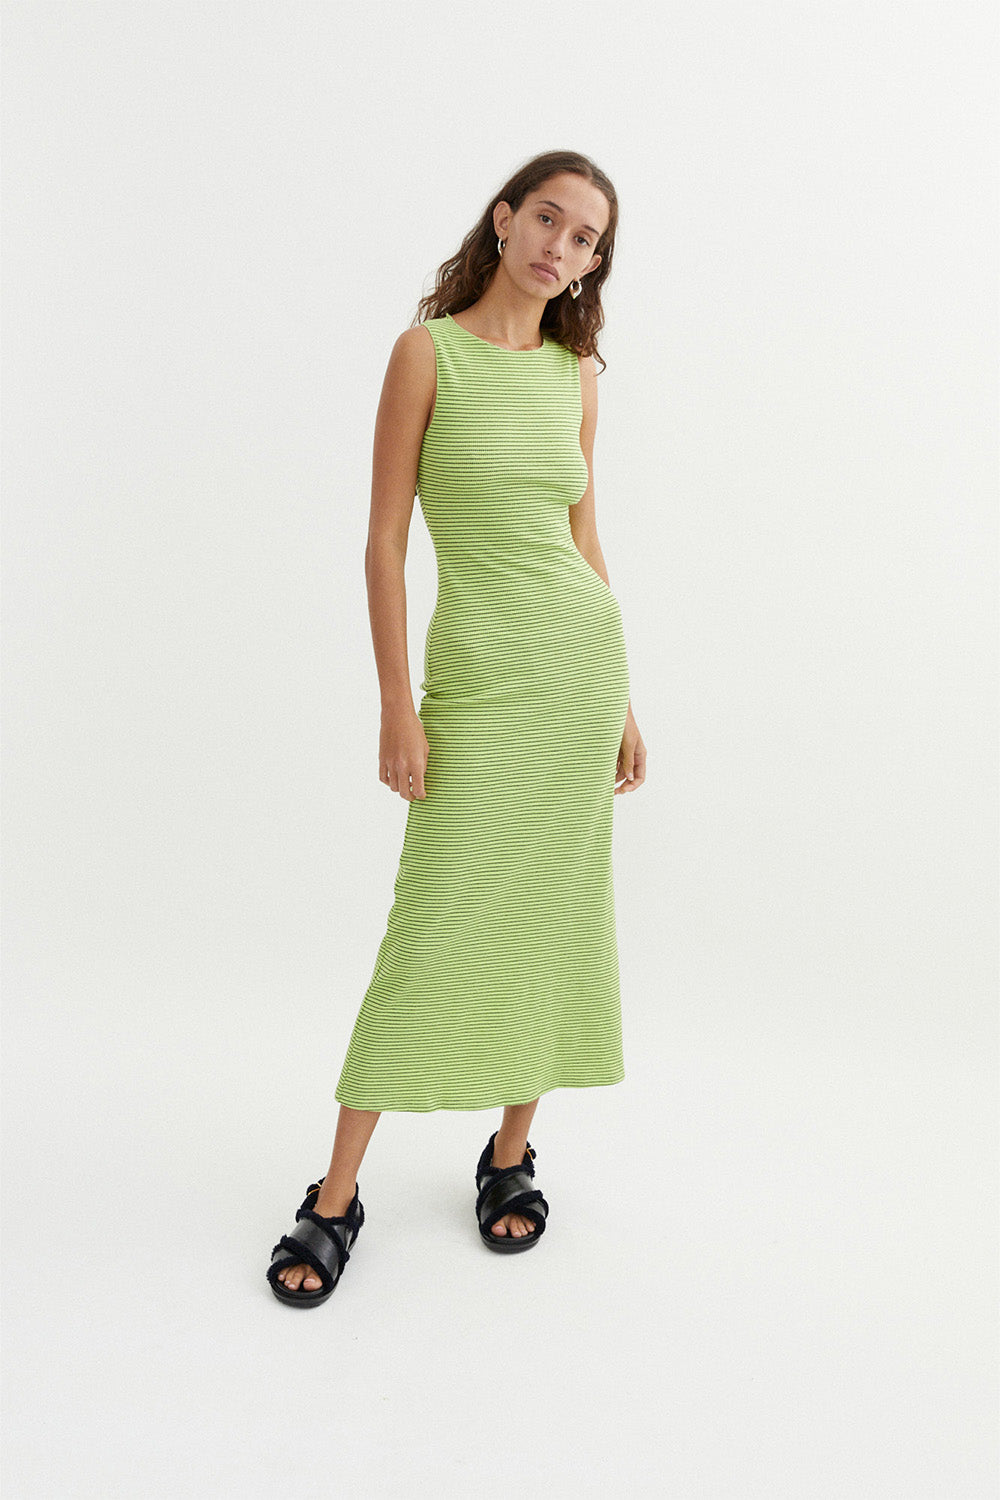 Anna Dress in Lime by BLANCA